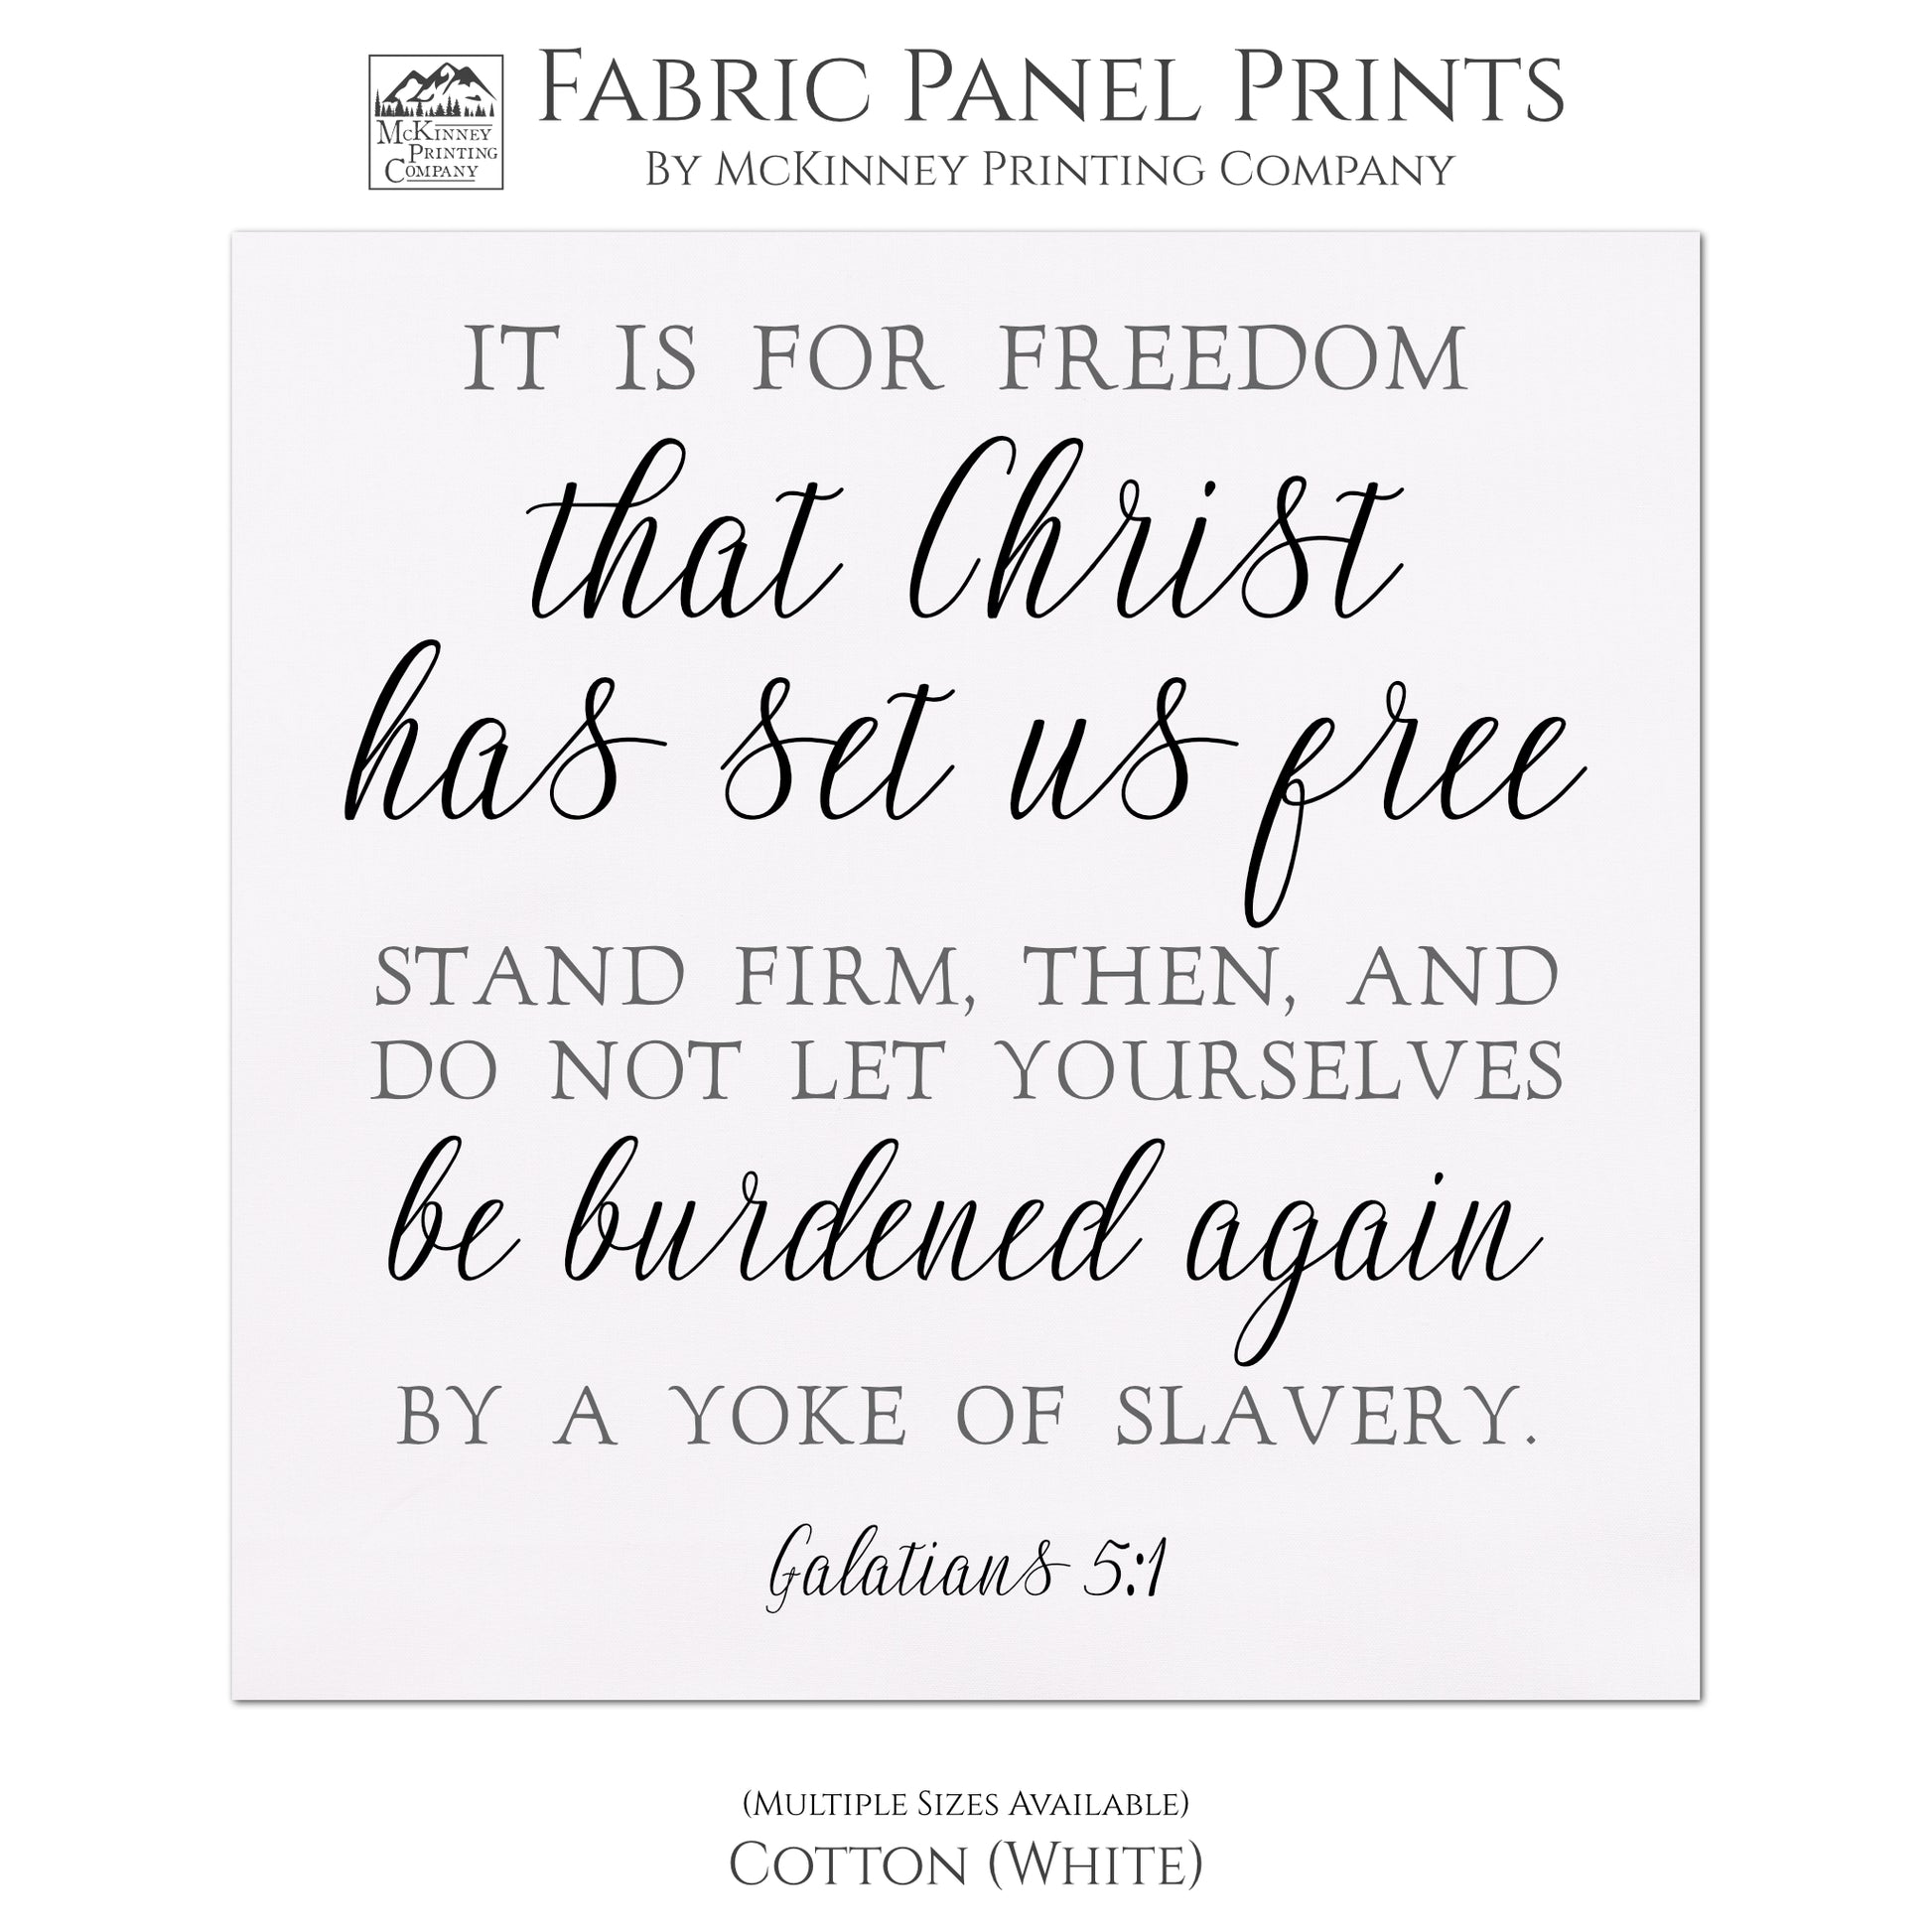 It is for freedom that Christ has set us free stand firm, then, and do not let yourselves be burdened again by a yoke of slavery. Galatians 5 1, Fabric Panel Print, Quilt Block, Large, Small - Cotton, White